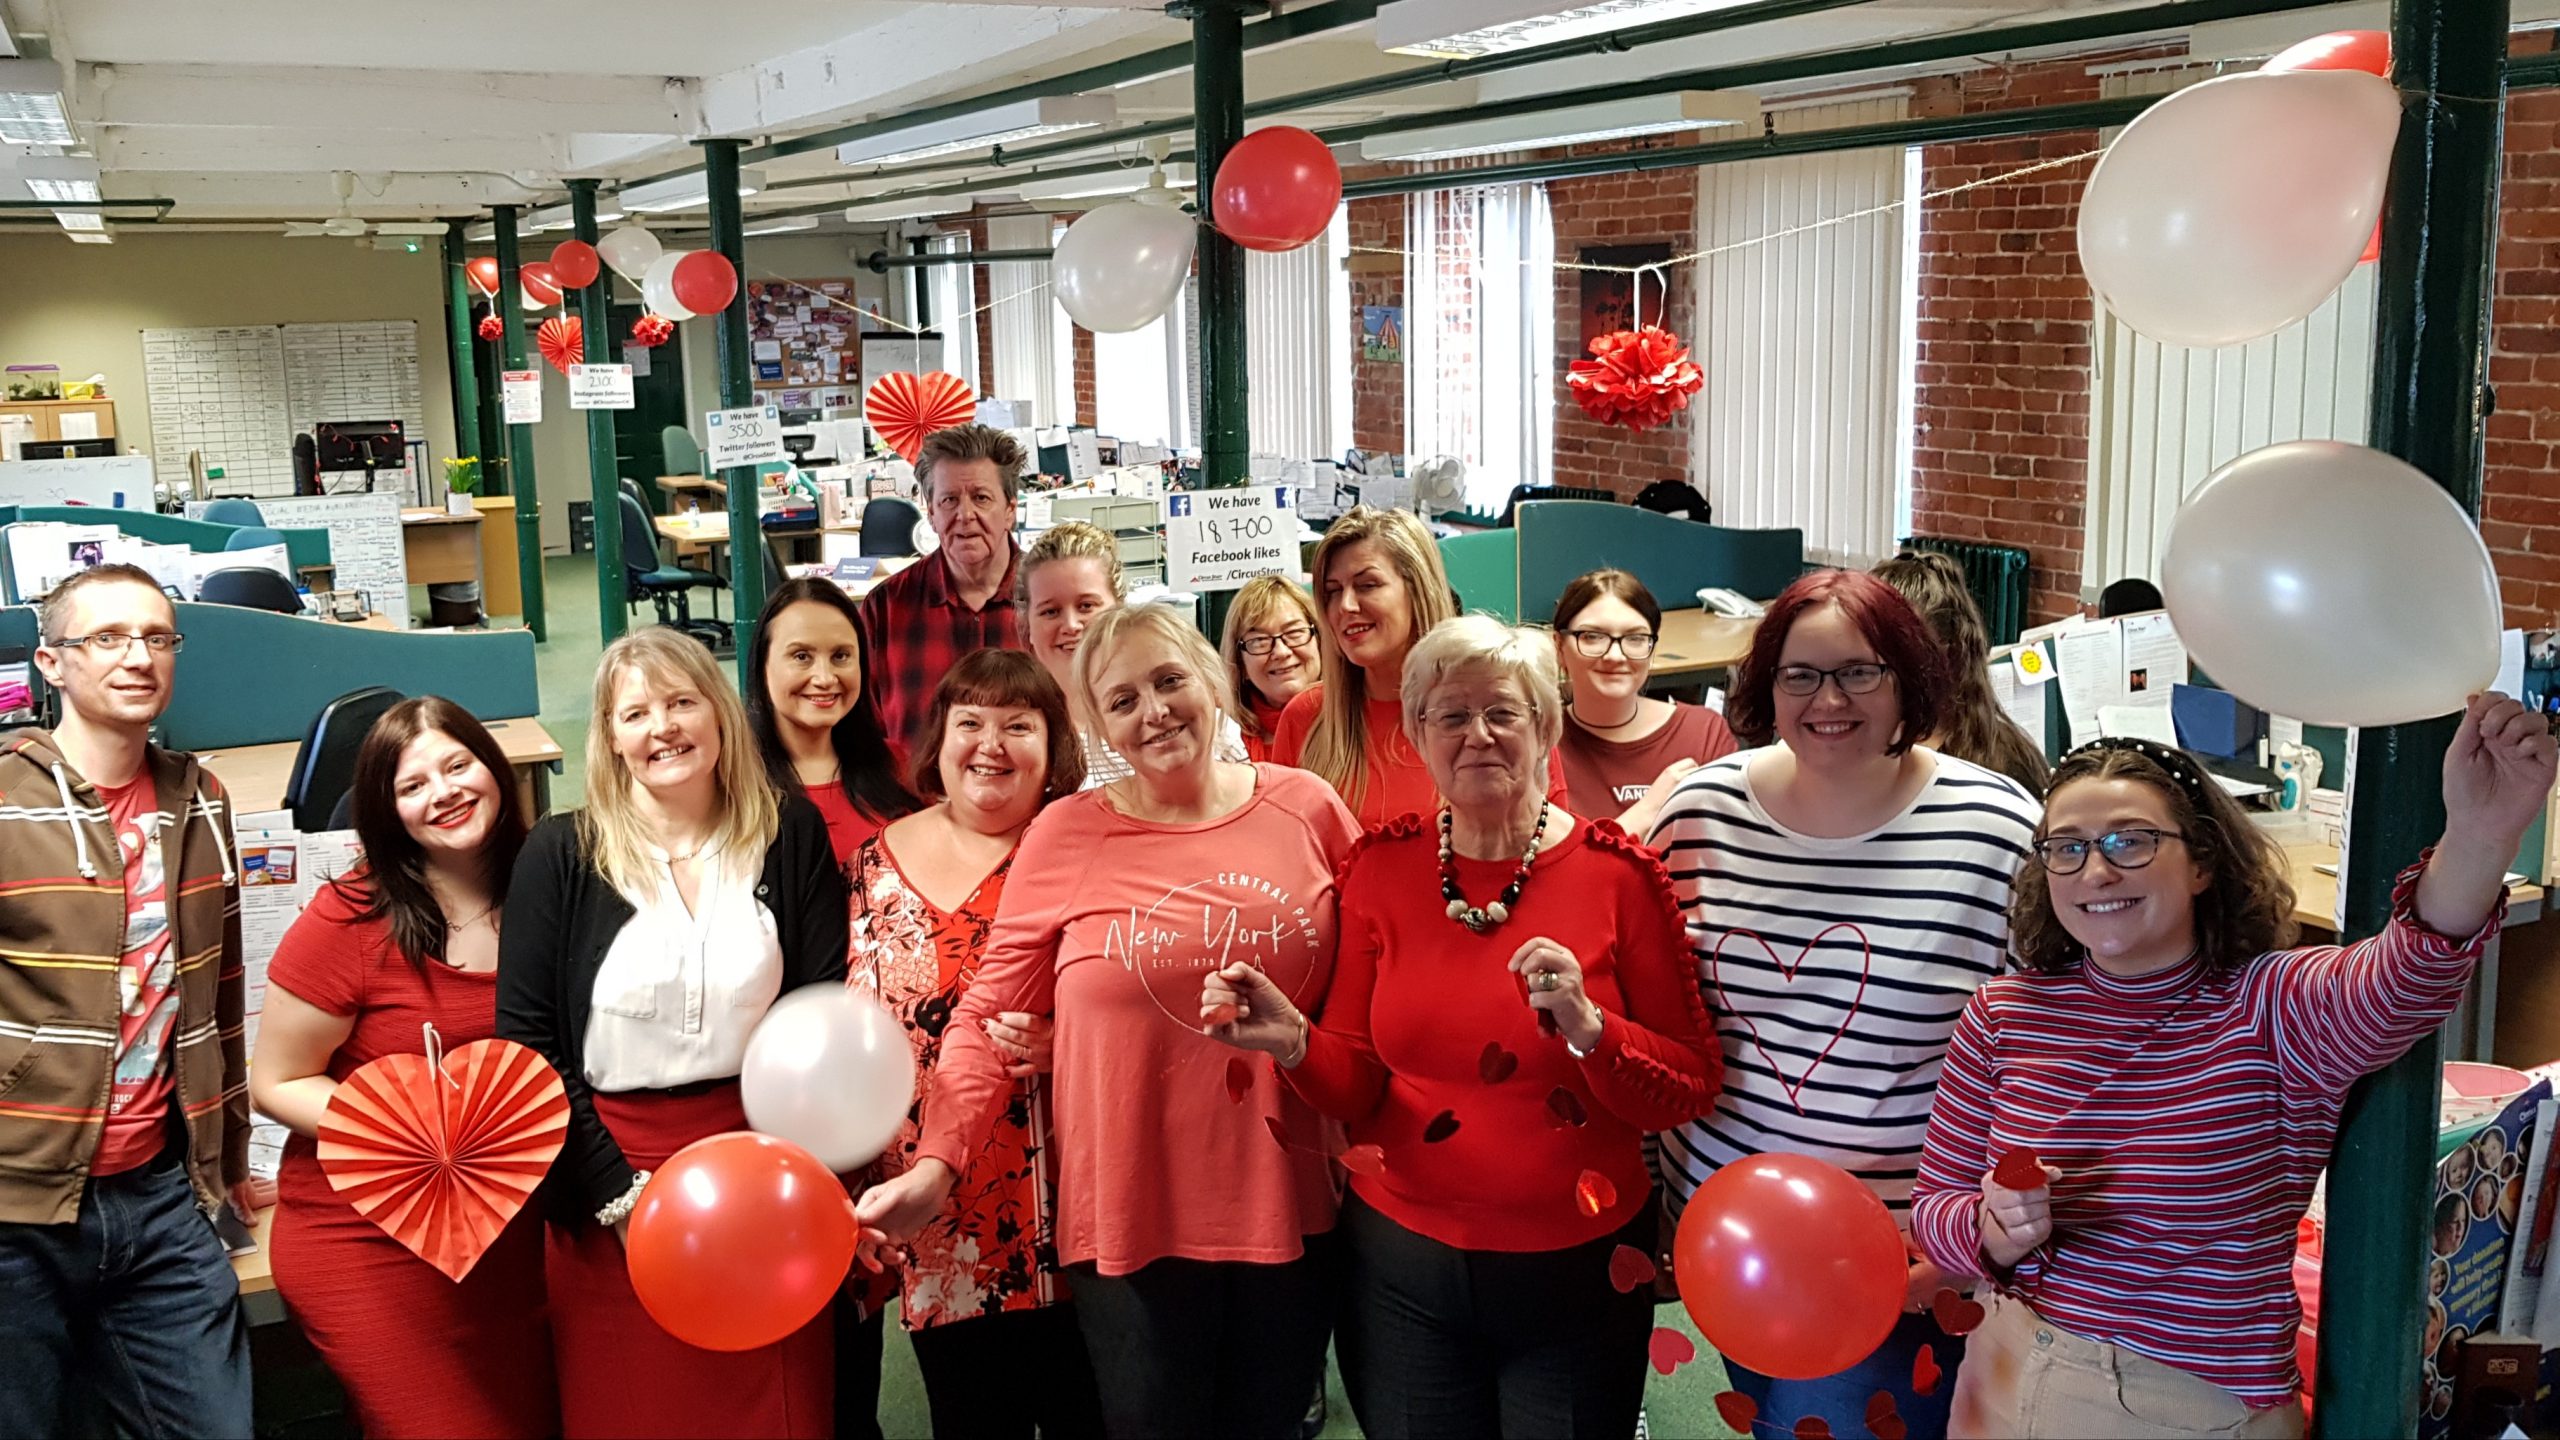 "An image of the Circus Starr team at the head office dressed in red"